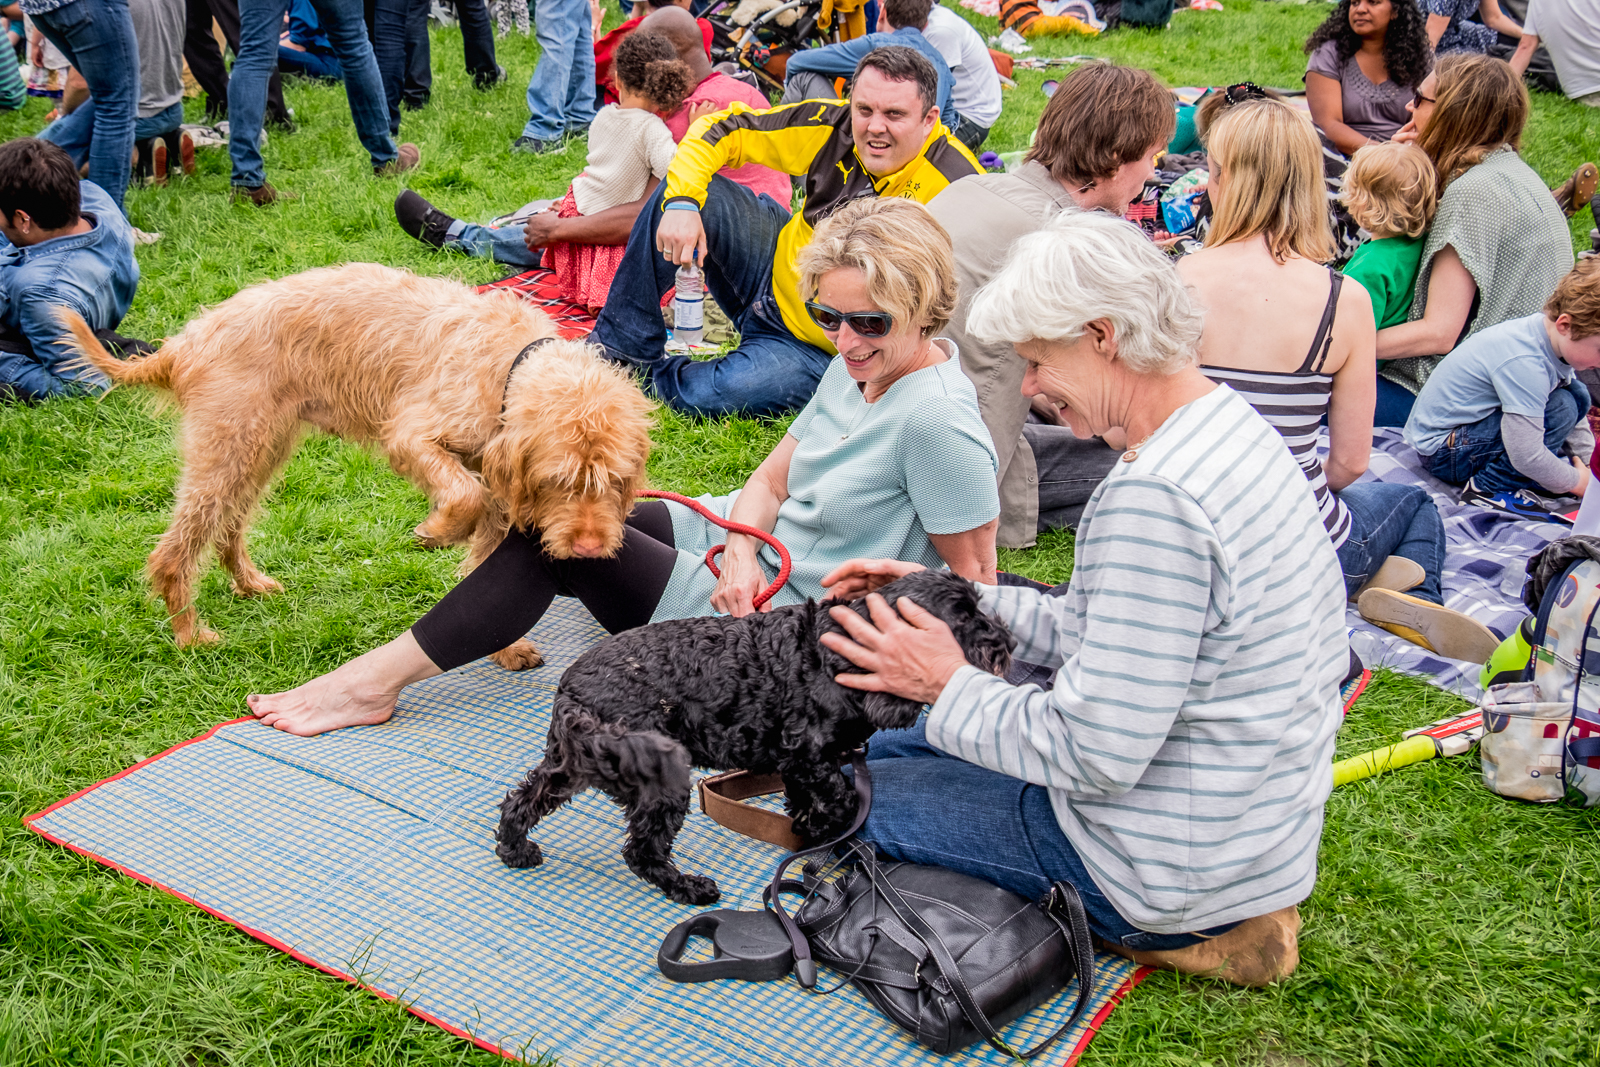 20160604_Lewisham_Hilly-Fields_who-let-the-dogs-out